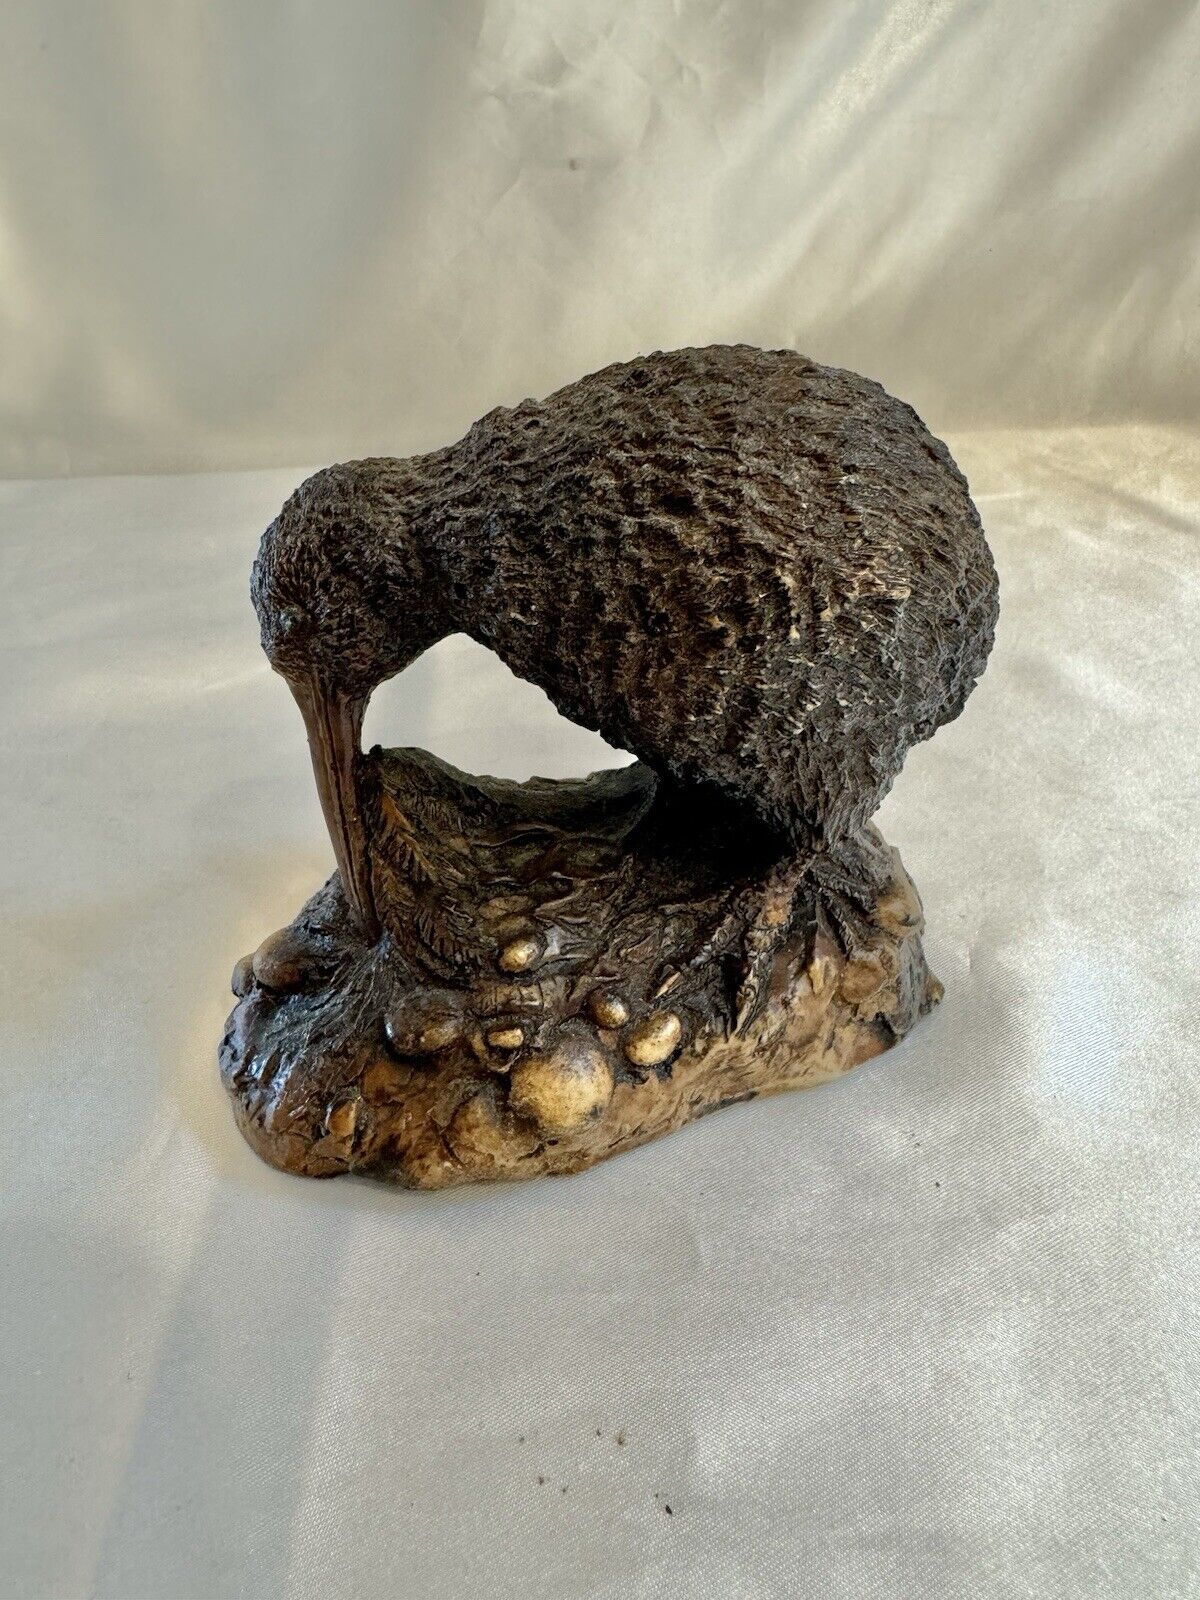 Vintage Kiwi Resin Figurine Sculpture By Davey Allan Co. New Zealand Signed